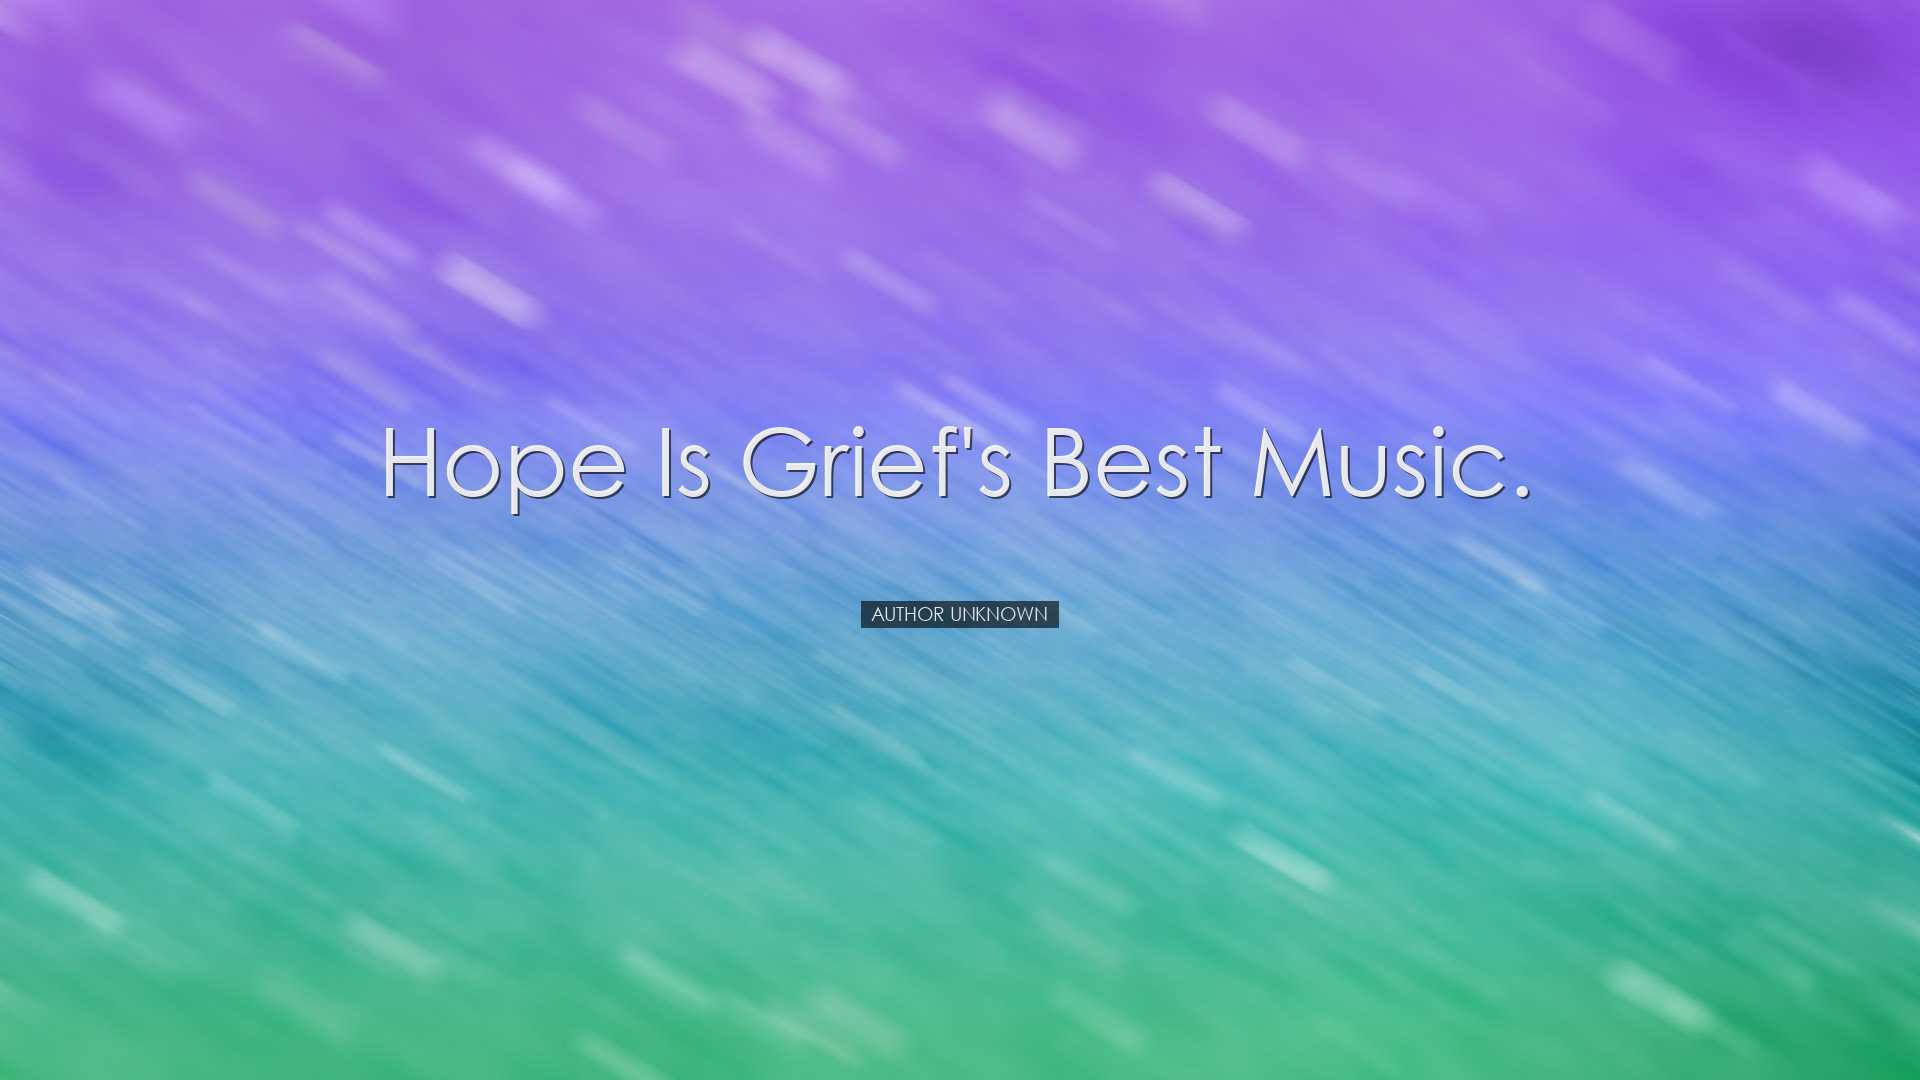 Hope is grief's best music. - Author Unknown